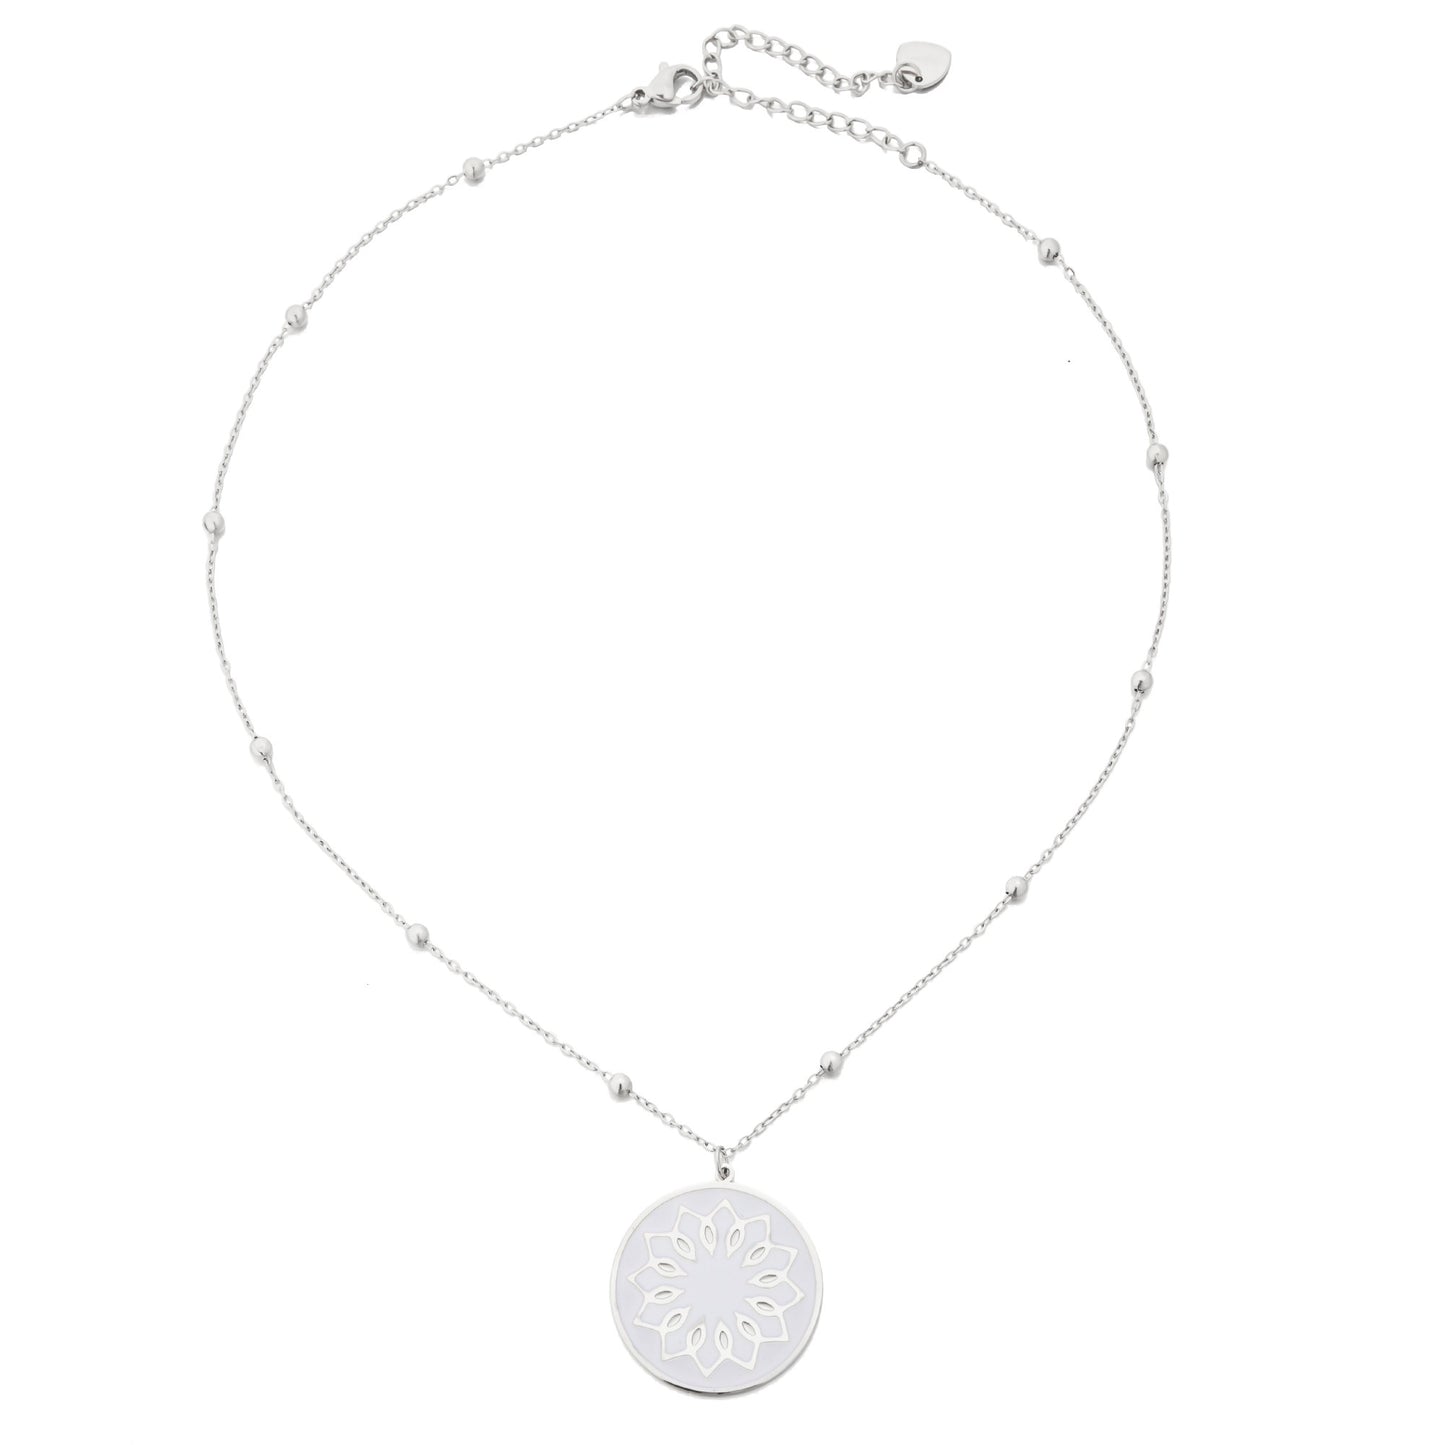 Silver Beads Necklace with White Enamel Flower Pendant